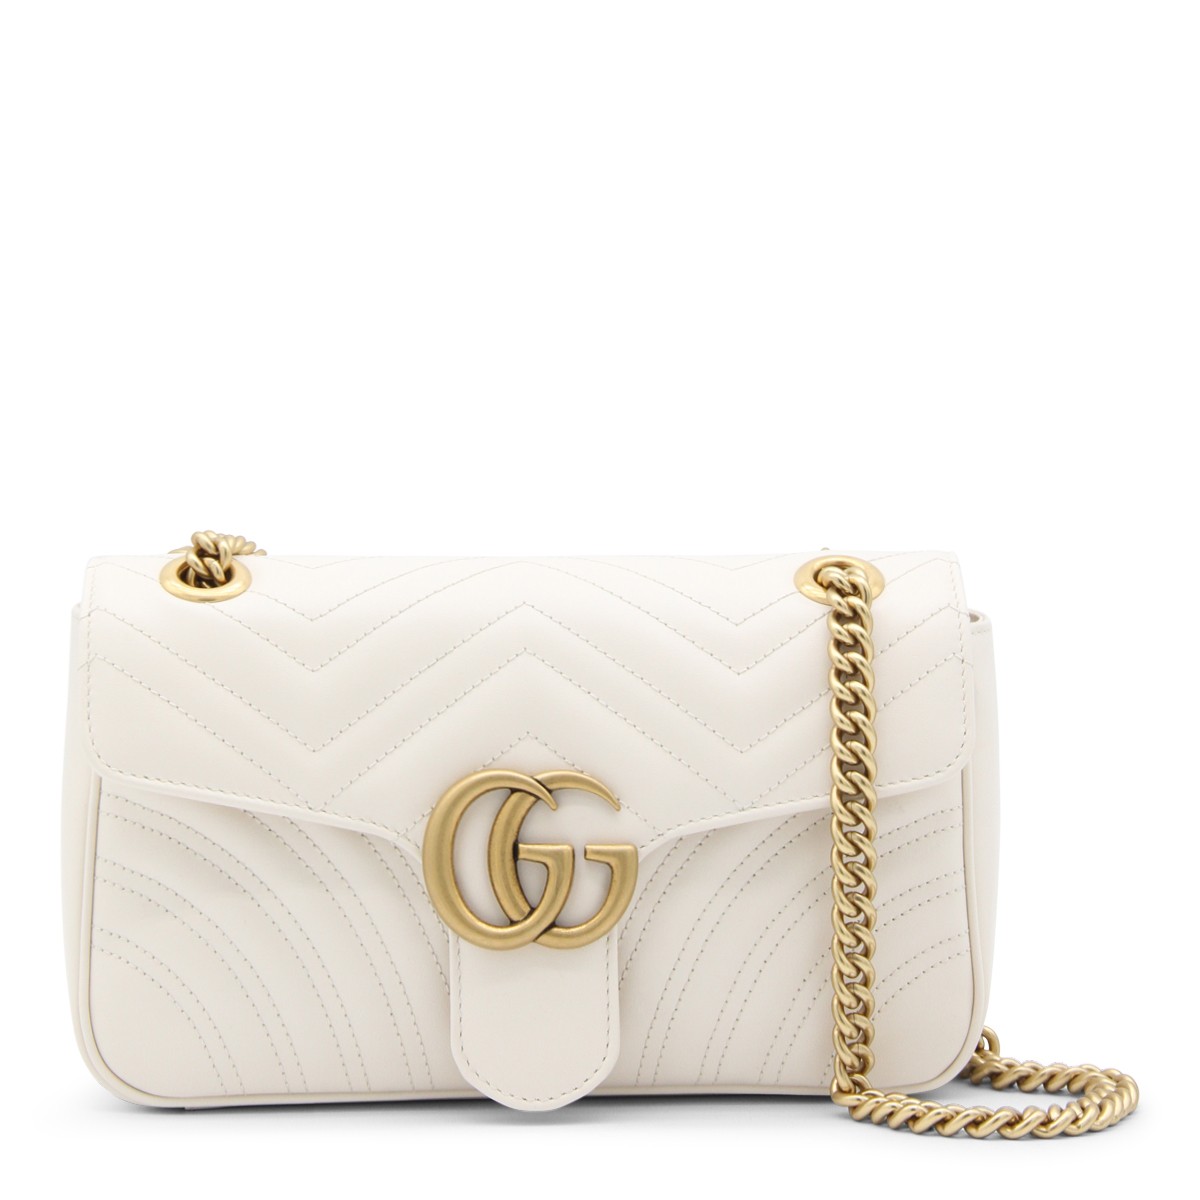 WHITE LEATHER MARMONT 2.0 SMALL SHOULDER BAG 